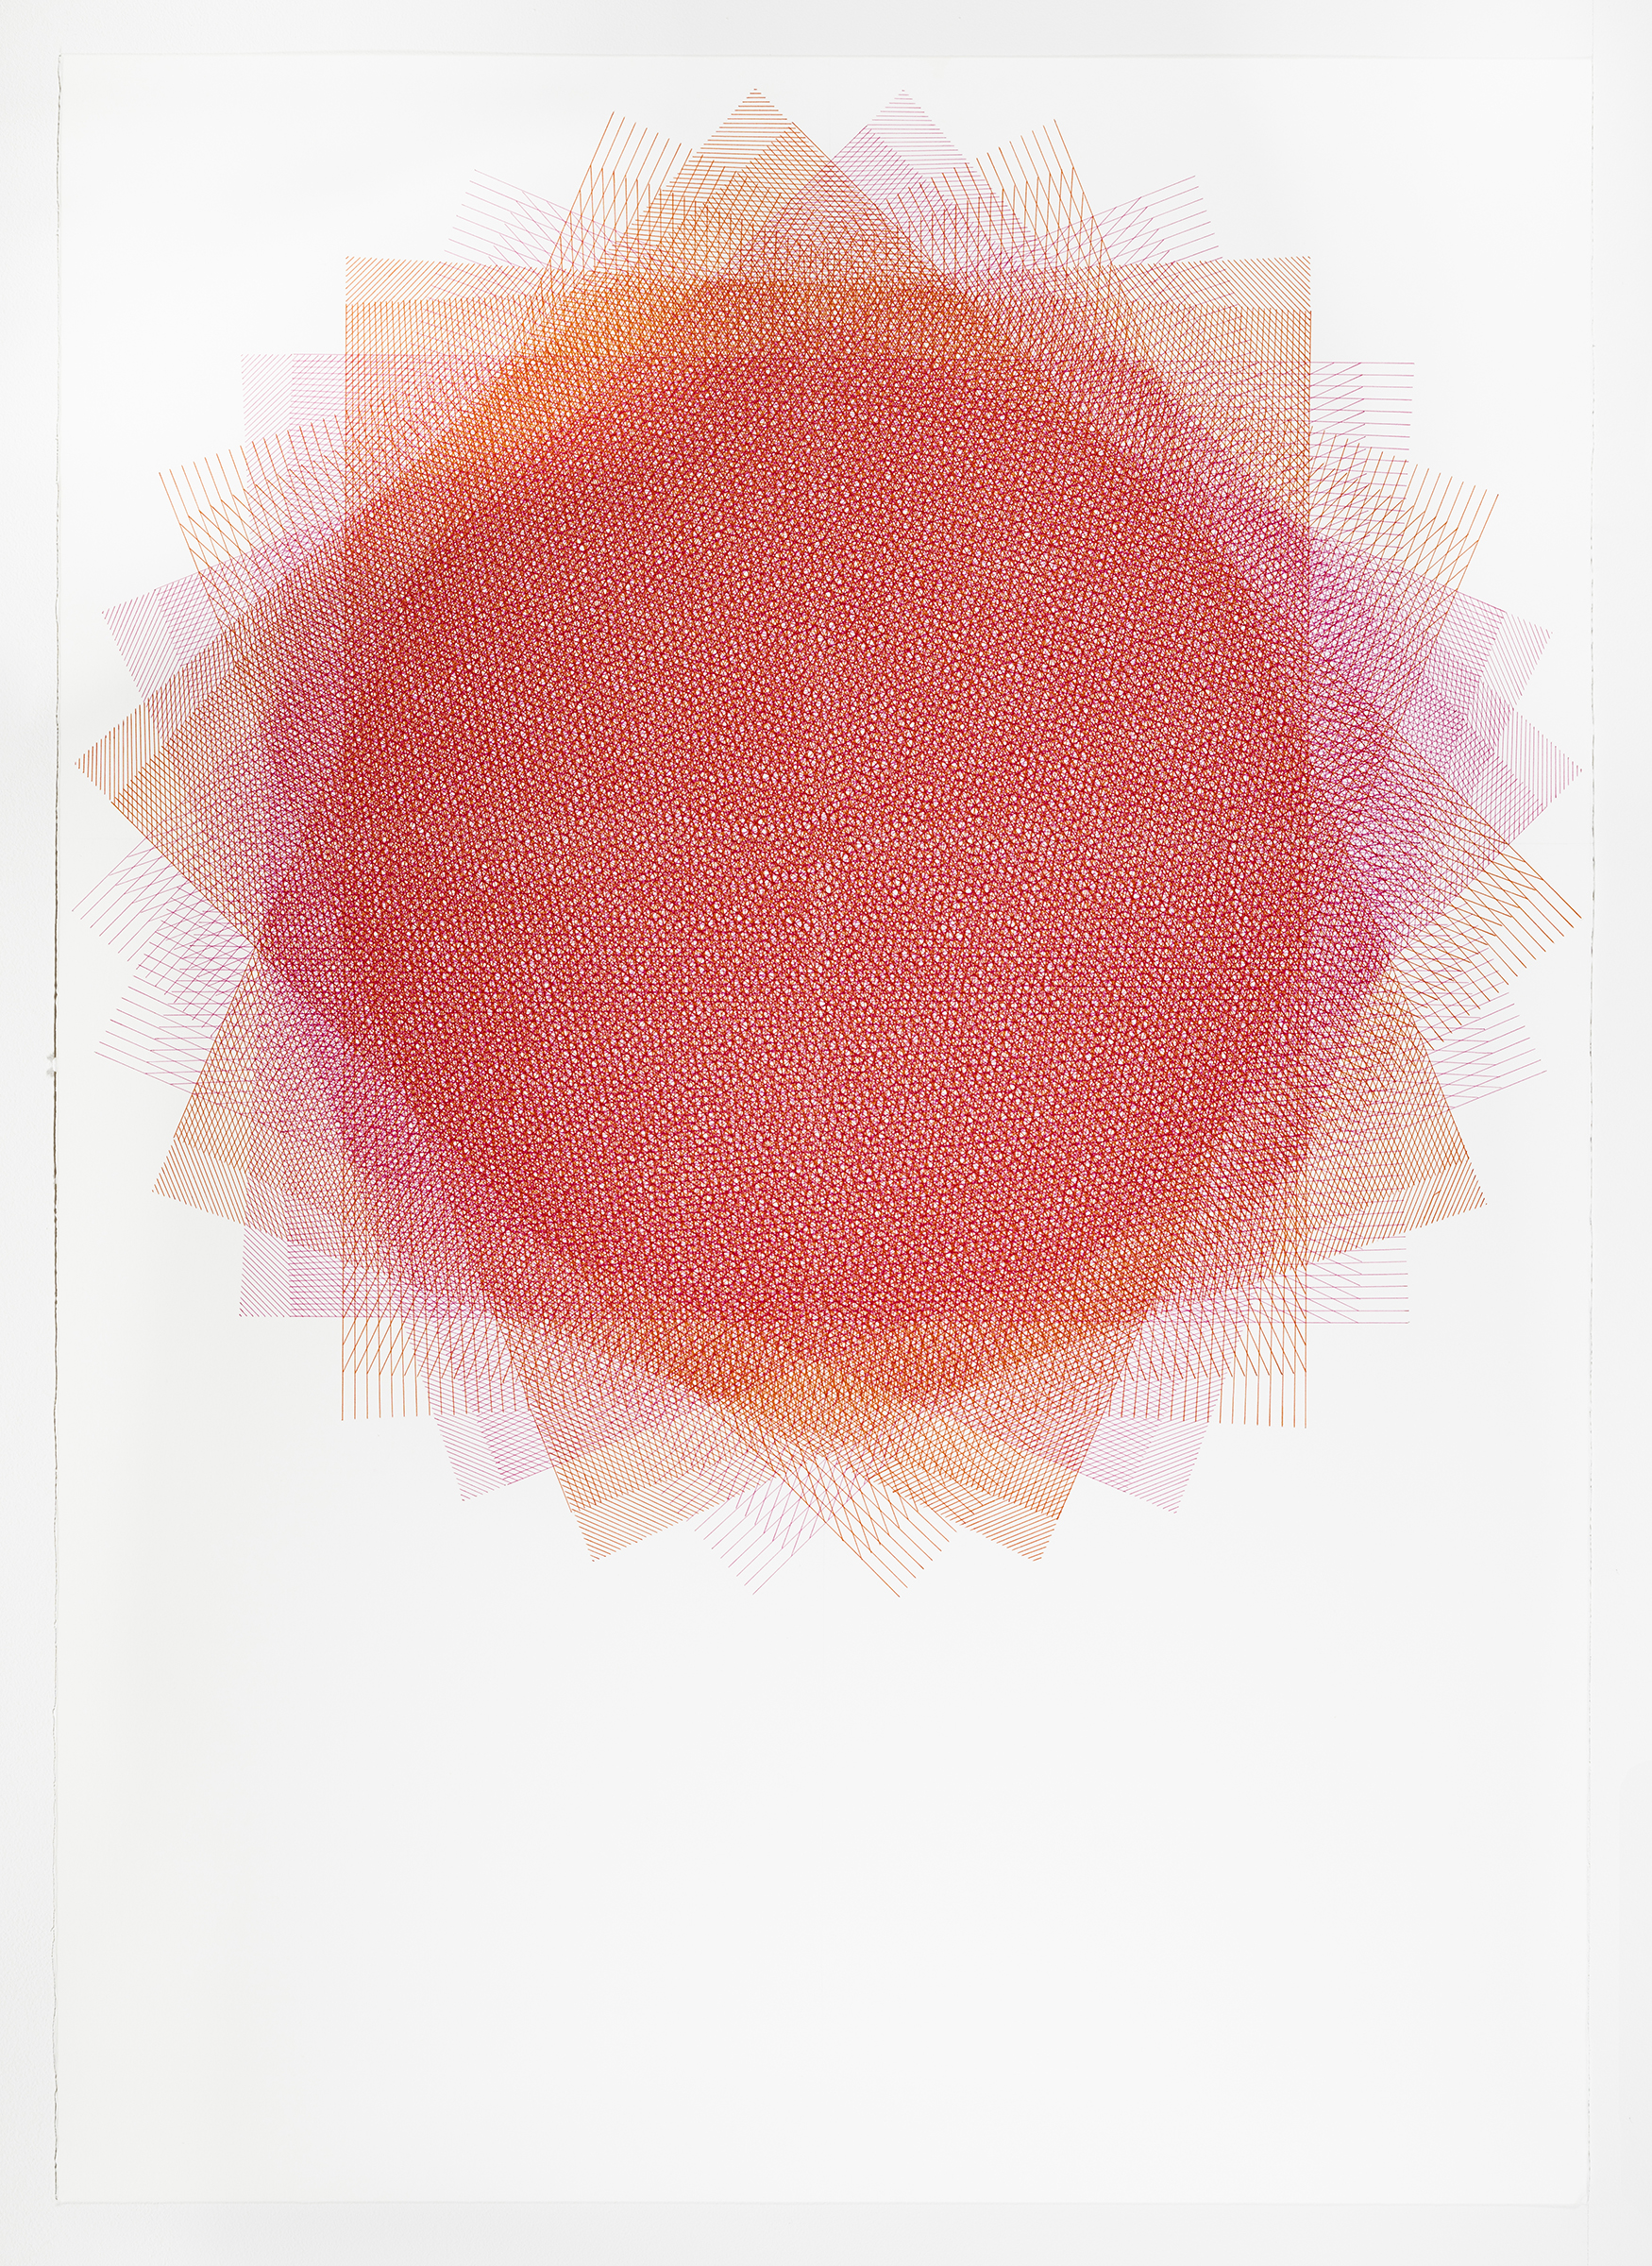 16 layers, pink and orange, 40 x 30 inches, 2015